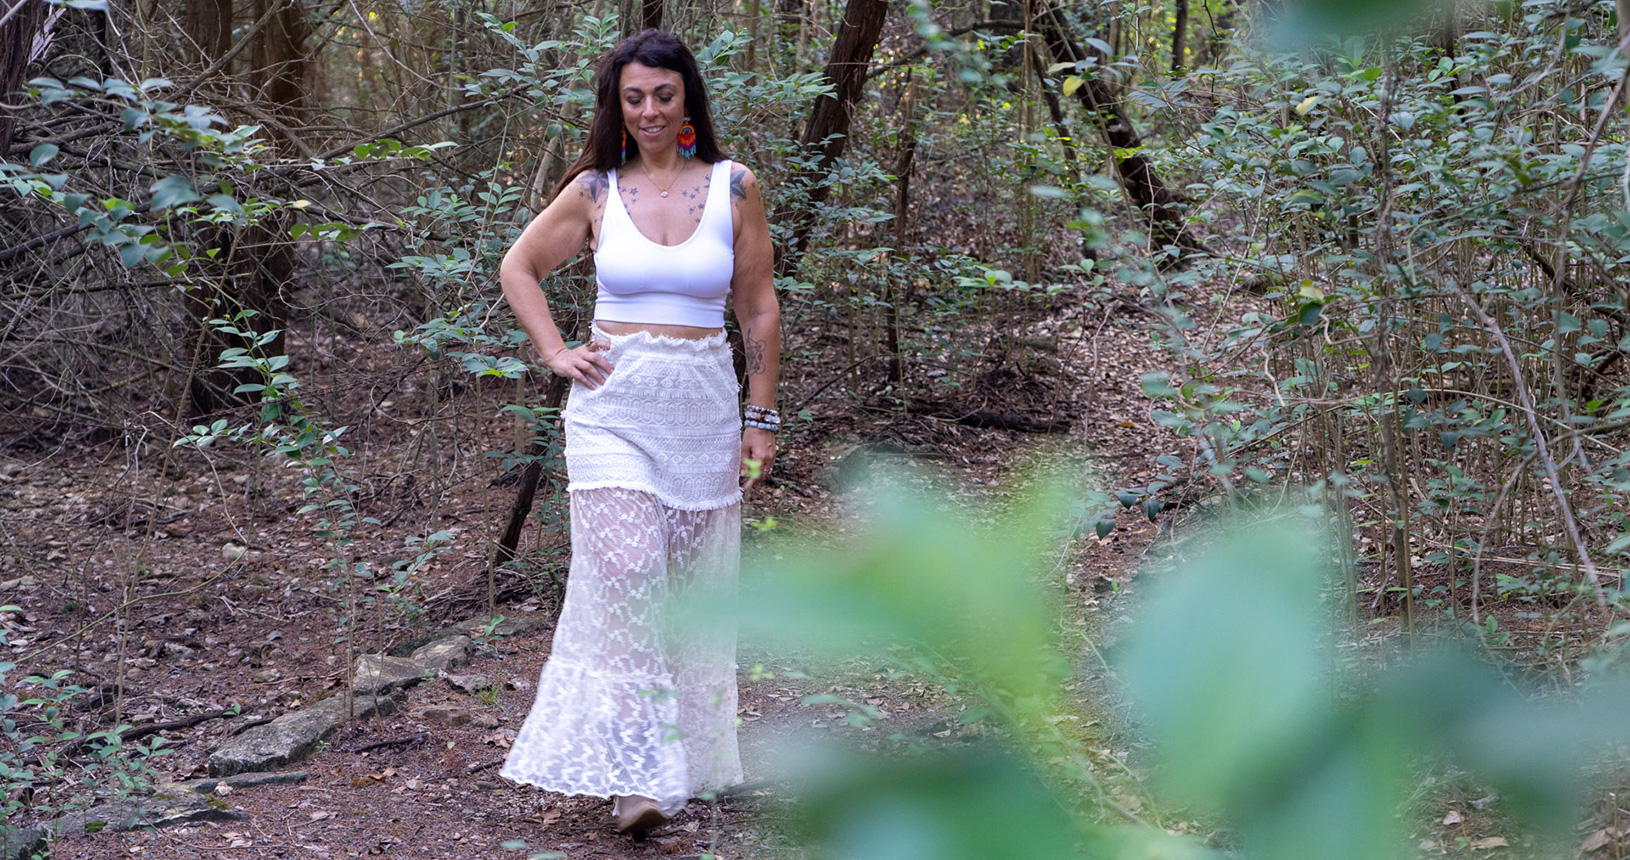 Lightworker Audrey Love stands in a forest, wearing white